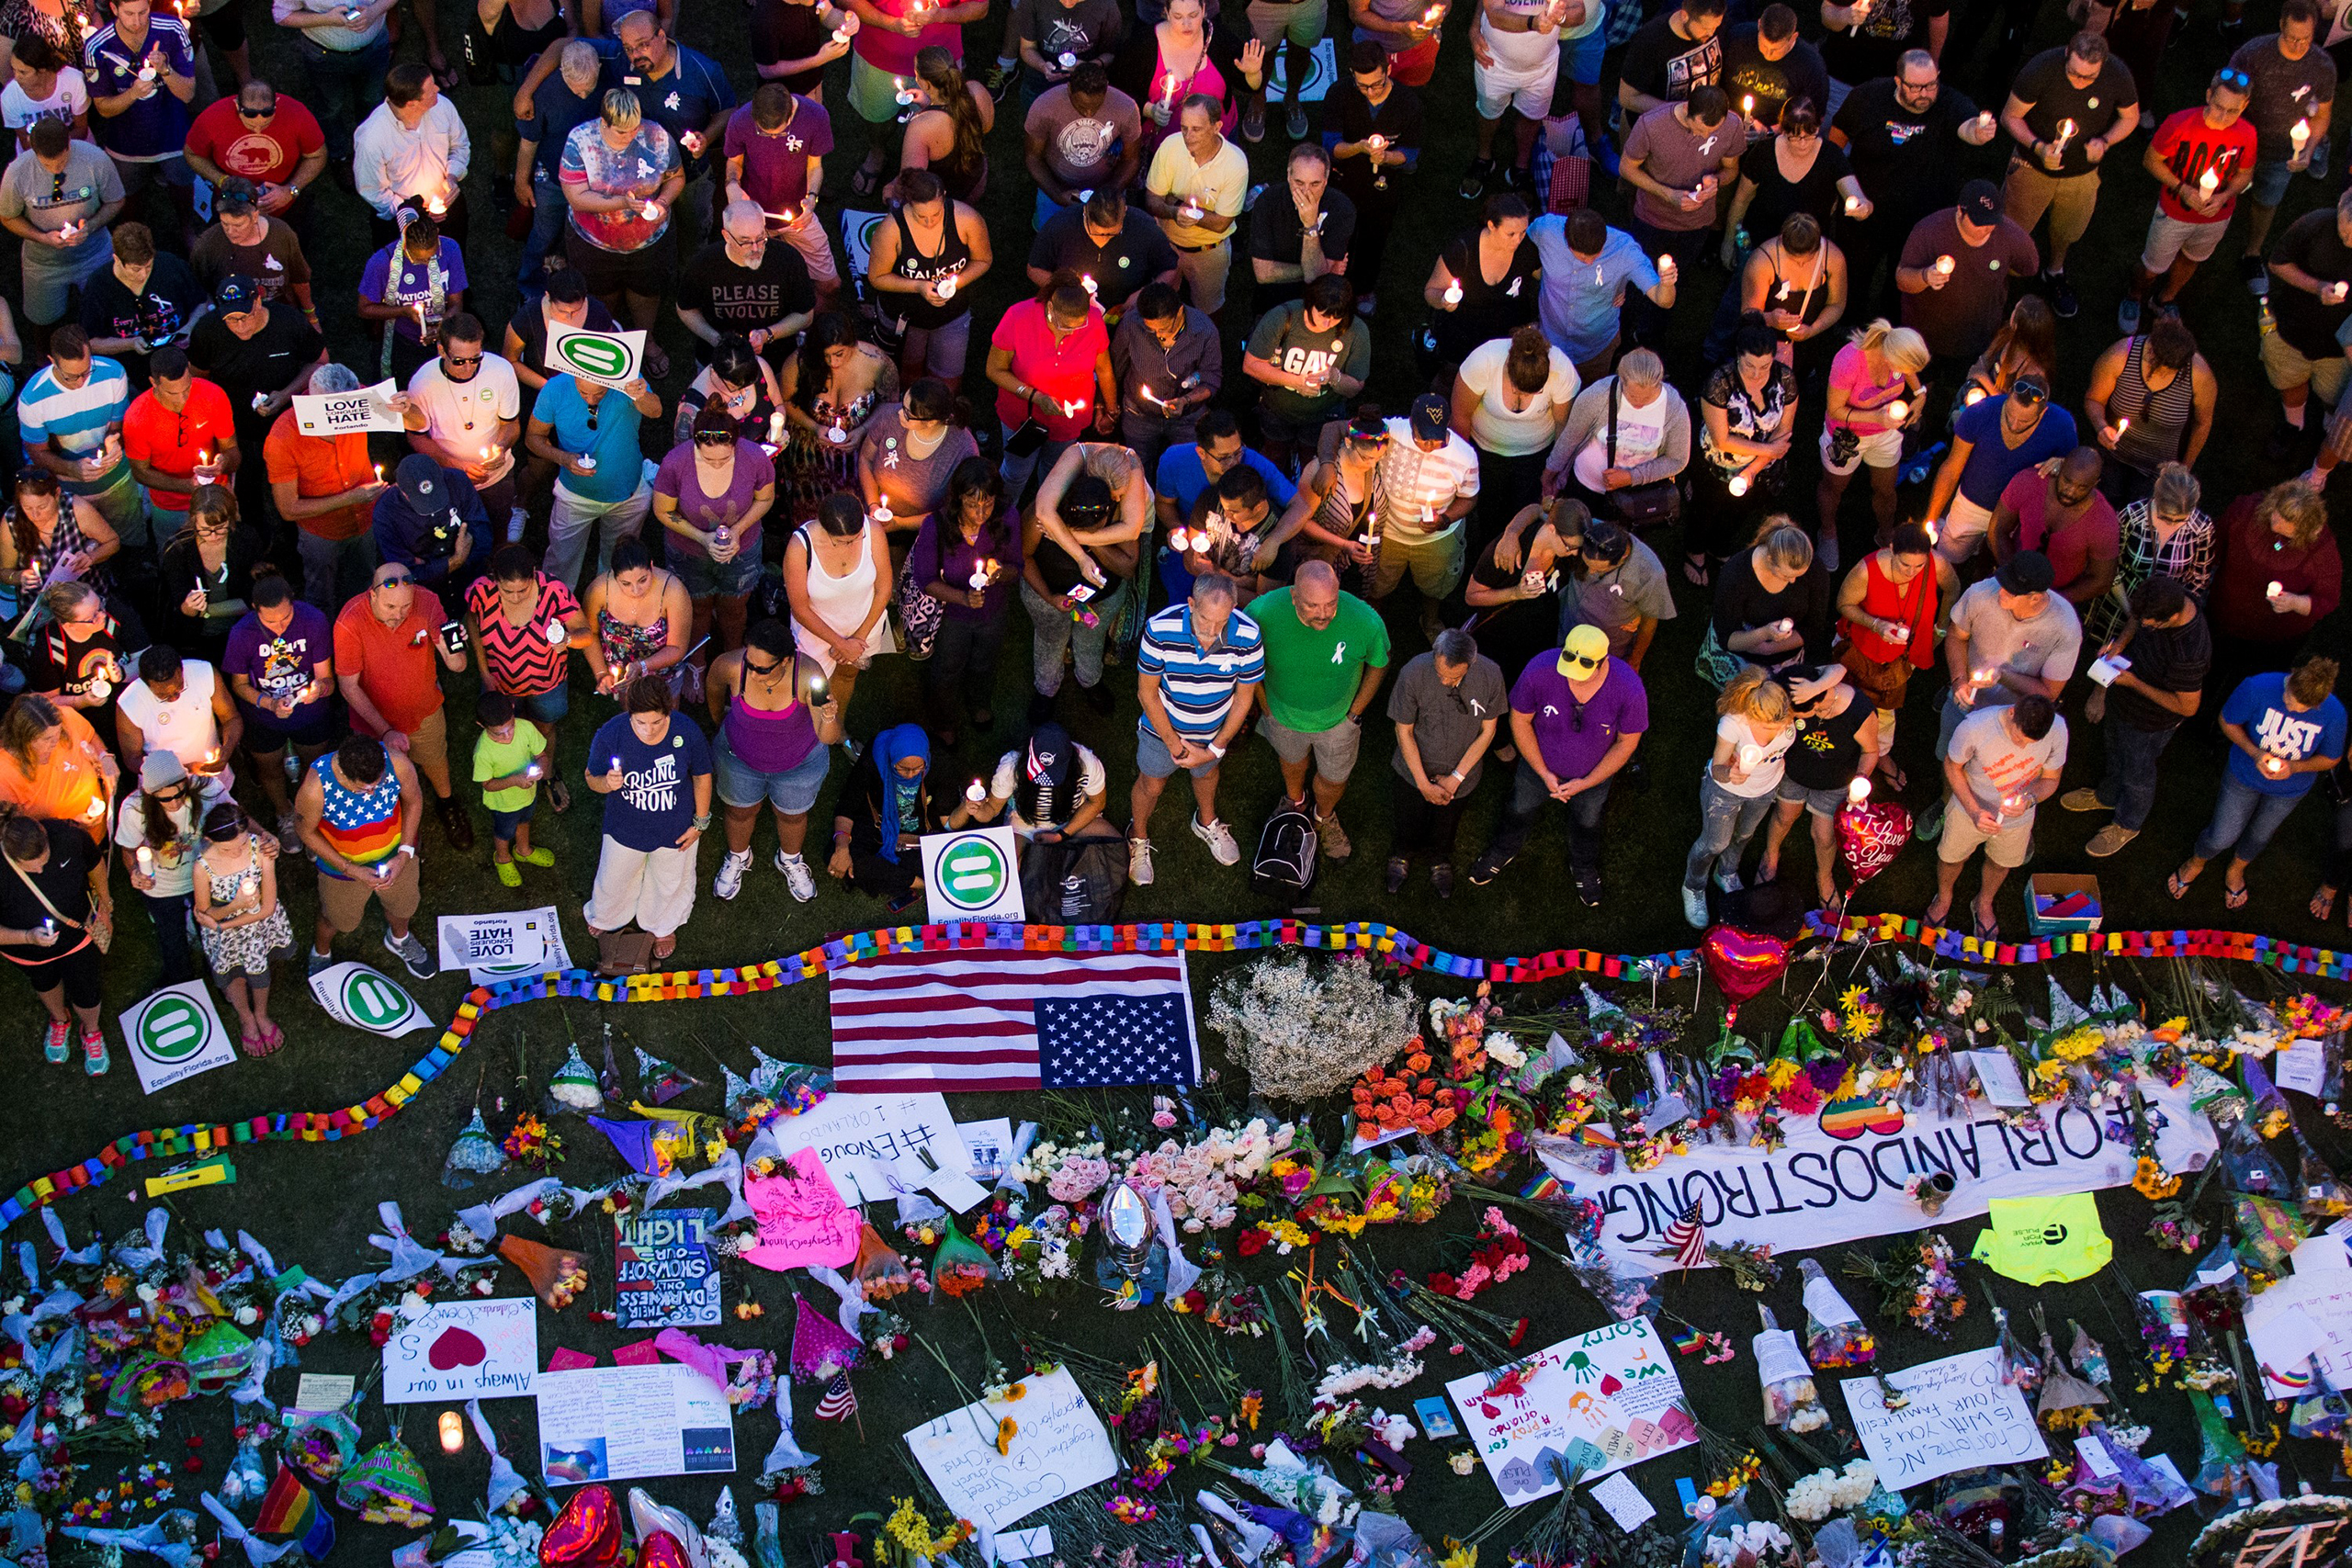 Thousands gather at the Dr. Phillips Center for the Performing Arts to pay their respects for those lost in the Pulse nightclub shooting in Orlando, Fla., on June 13, 2016. (Samuel Corum—Anadolu Agency/Getty Images)